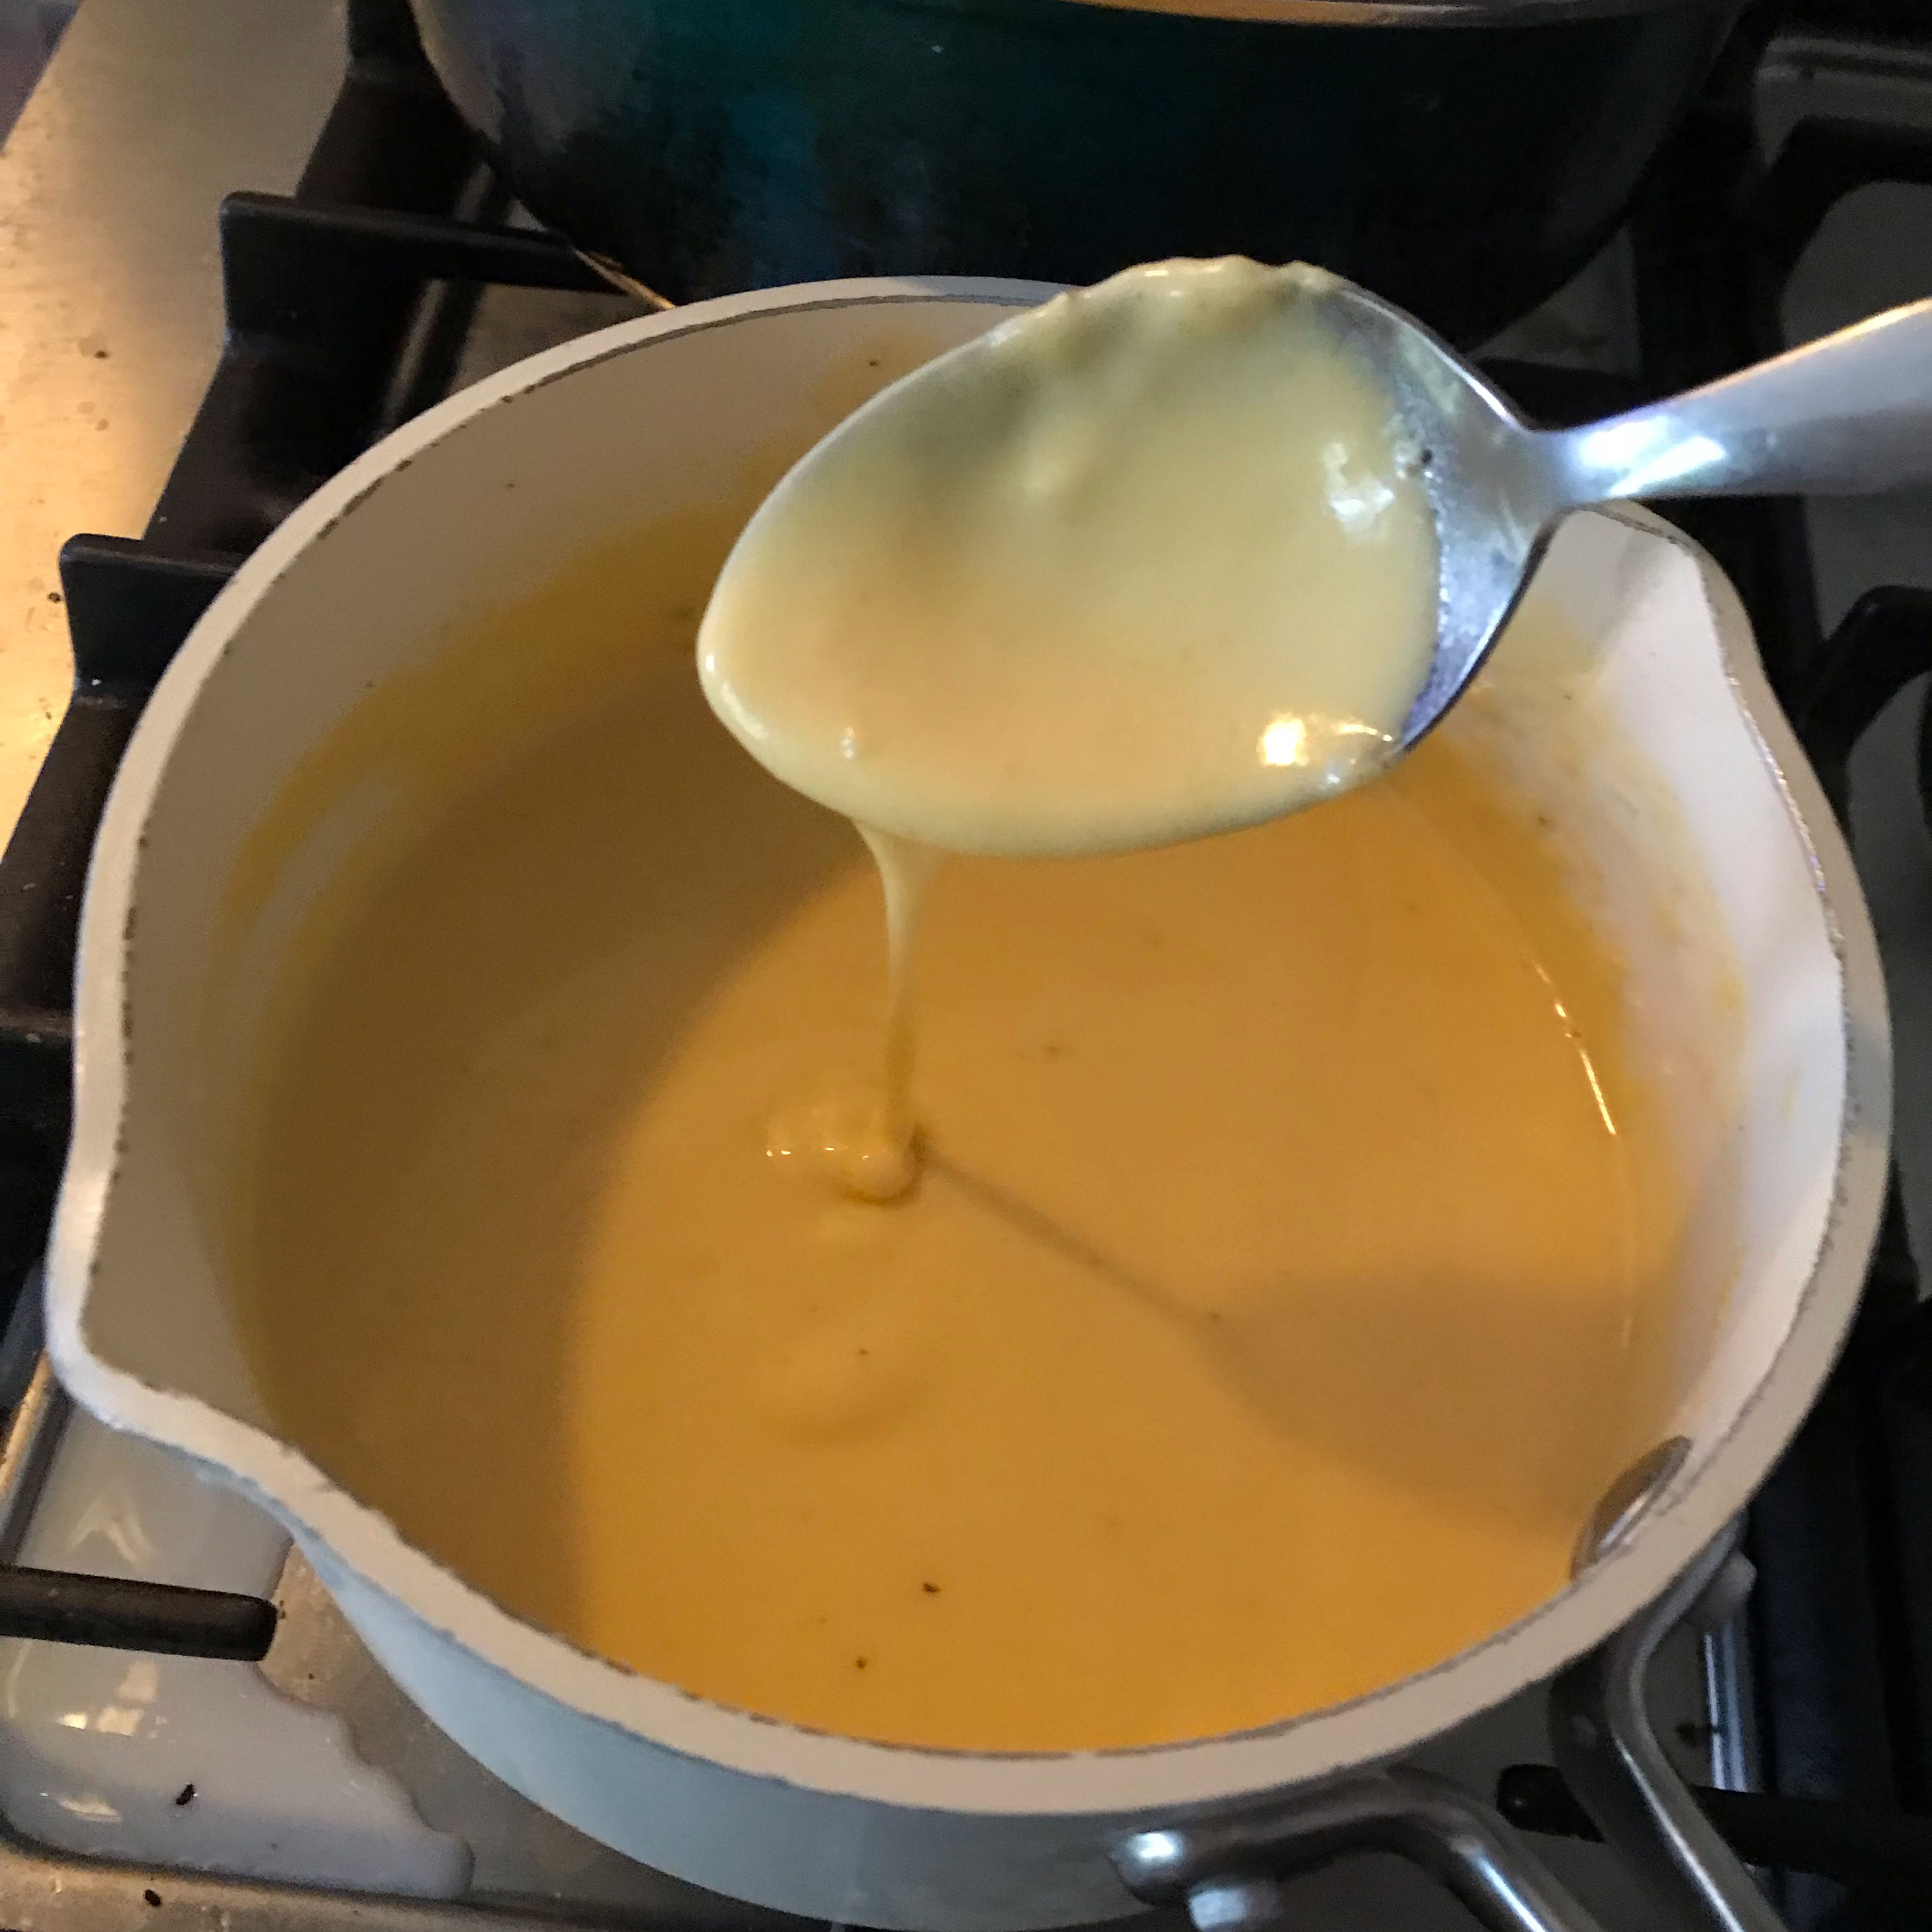 Add the slices of cheddar cheese and whisk until they’re melted in.